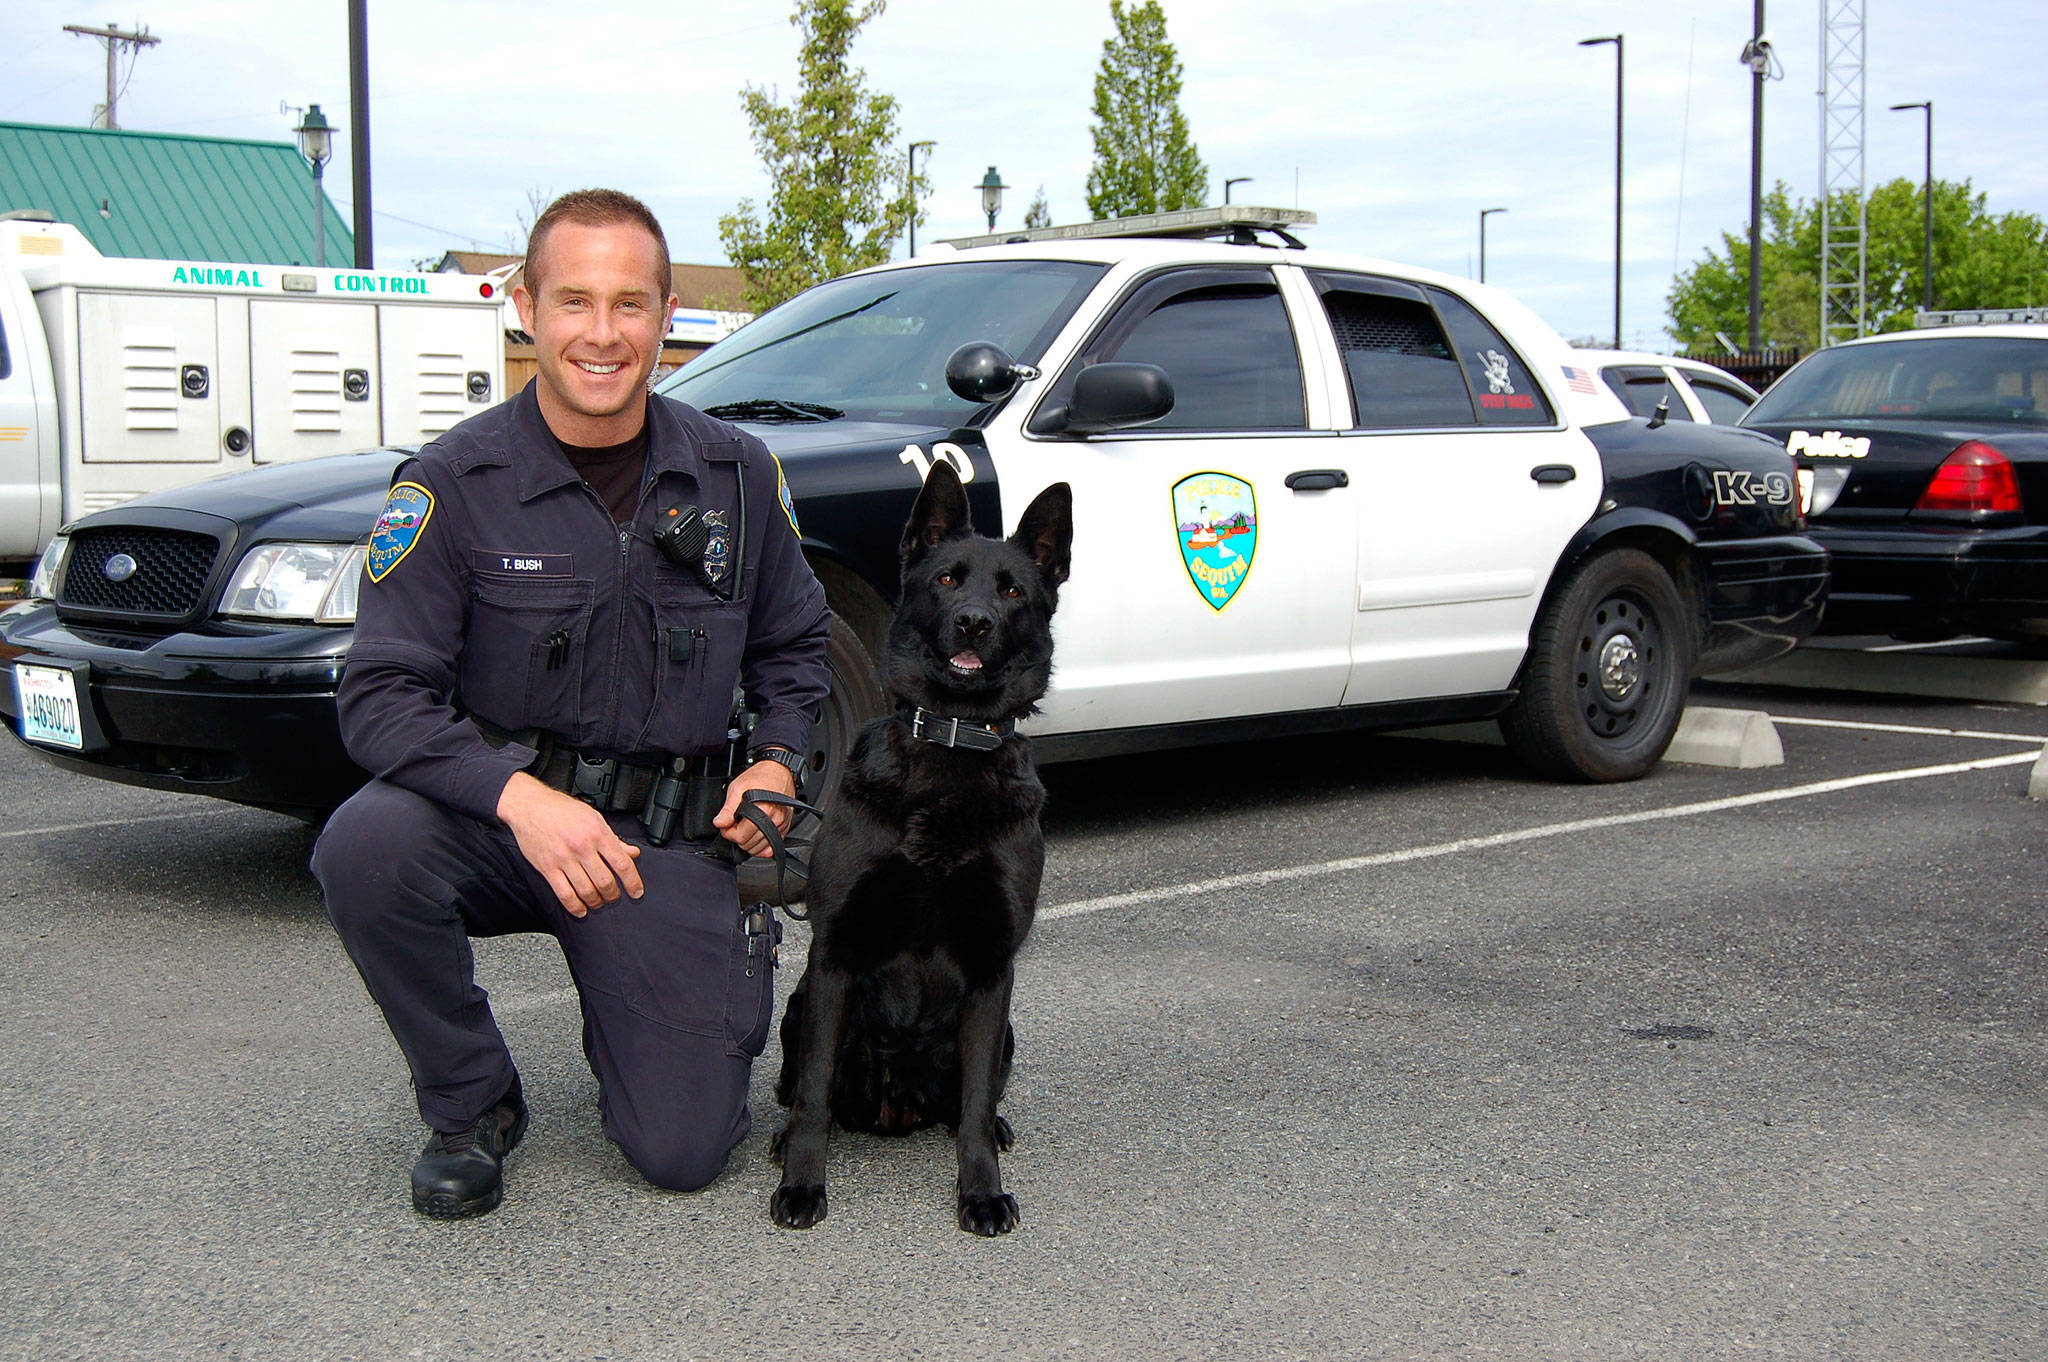 Sequim Police Officer Tony Bush kneels with new canine officer Mamba, a 16-month-old German shepherd outside the Police Department. He arrived last week with the dog and anticipates becoming state-certified by this summer so that she can work full-time with him. Sequim Gazette photo by Matthew Nash